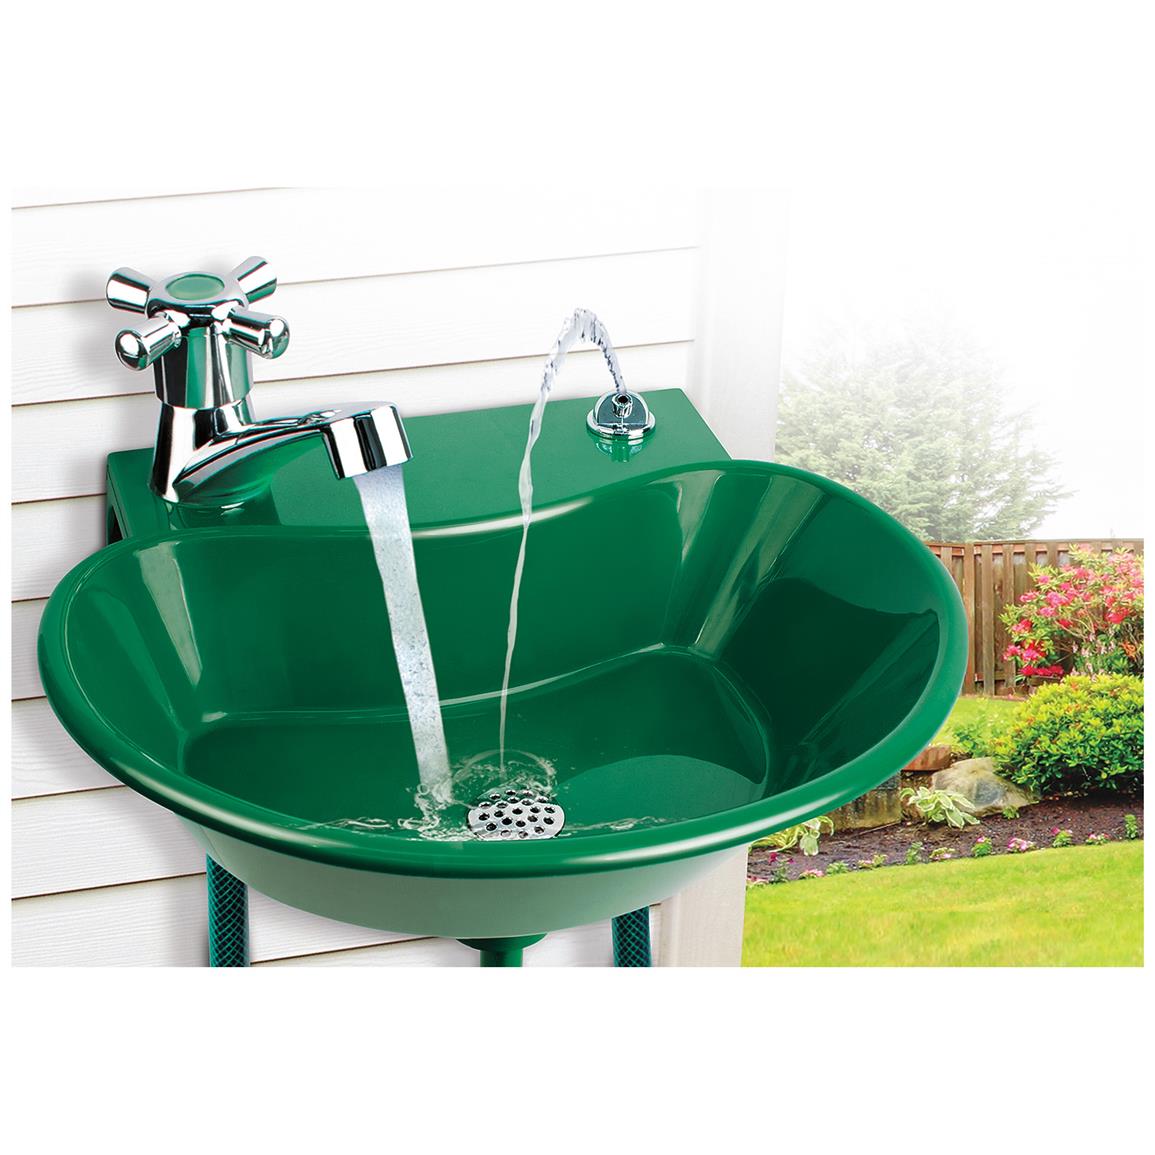 Outdoor 2In1 Water Fountain Faucet 660922, Yard & Garden at